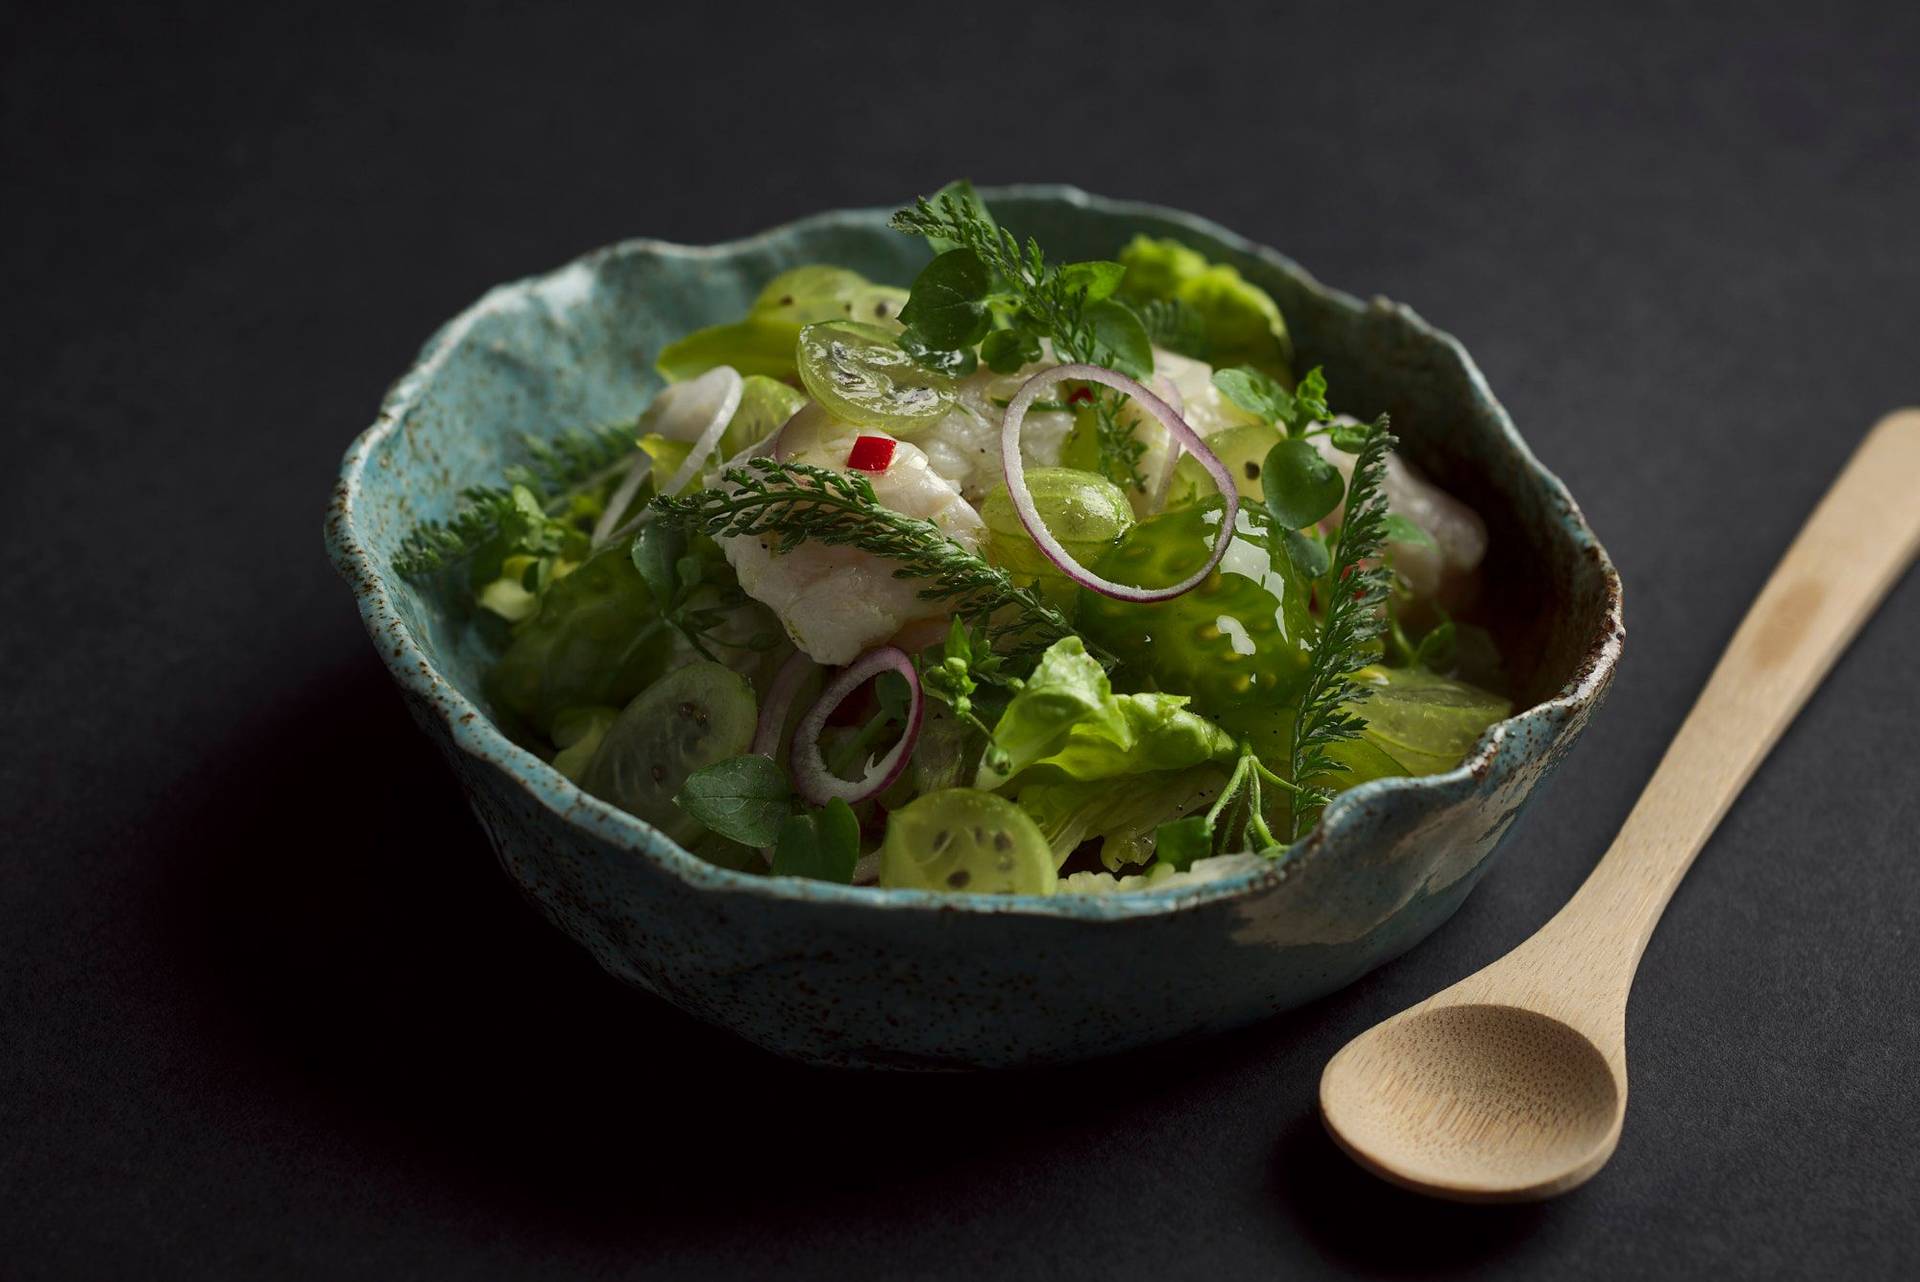 cod ceviche with gooseberries in a turquoise ceramic bowl with black background